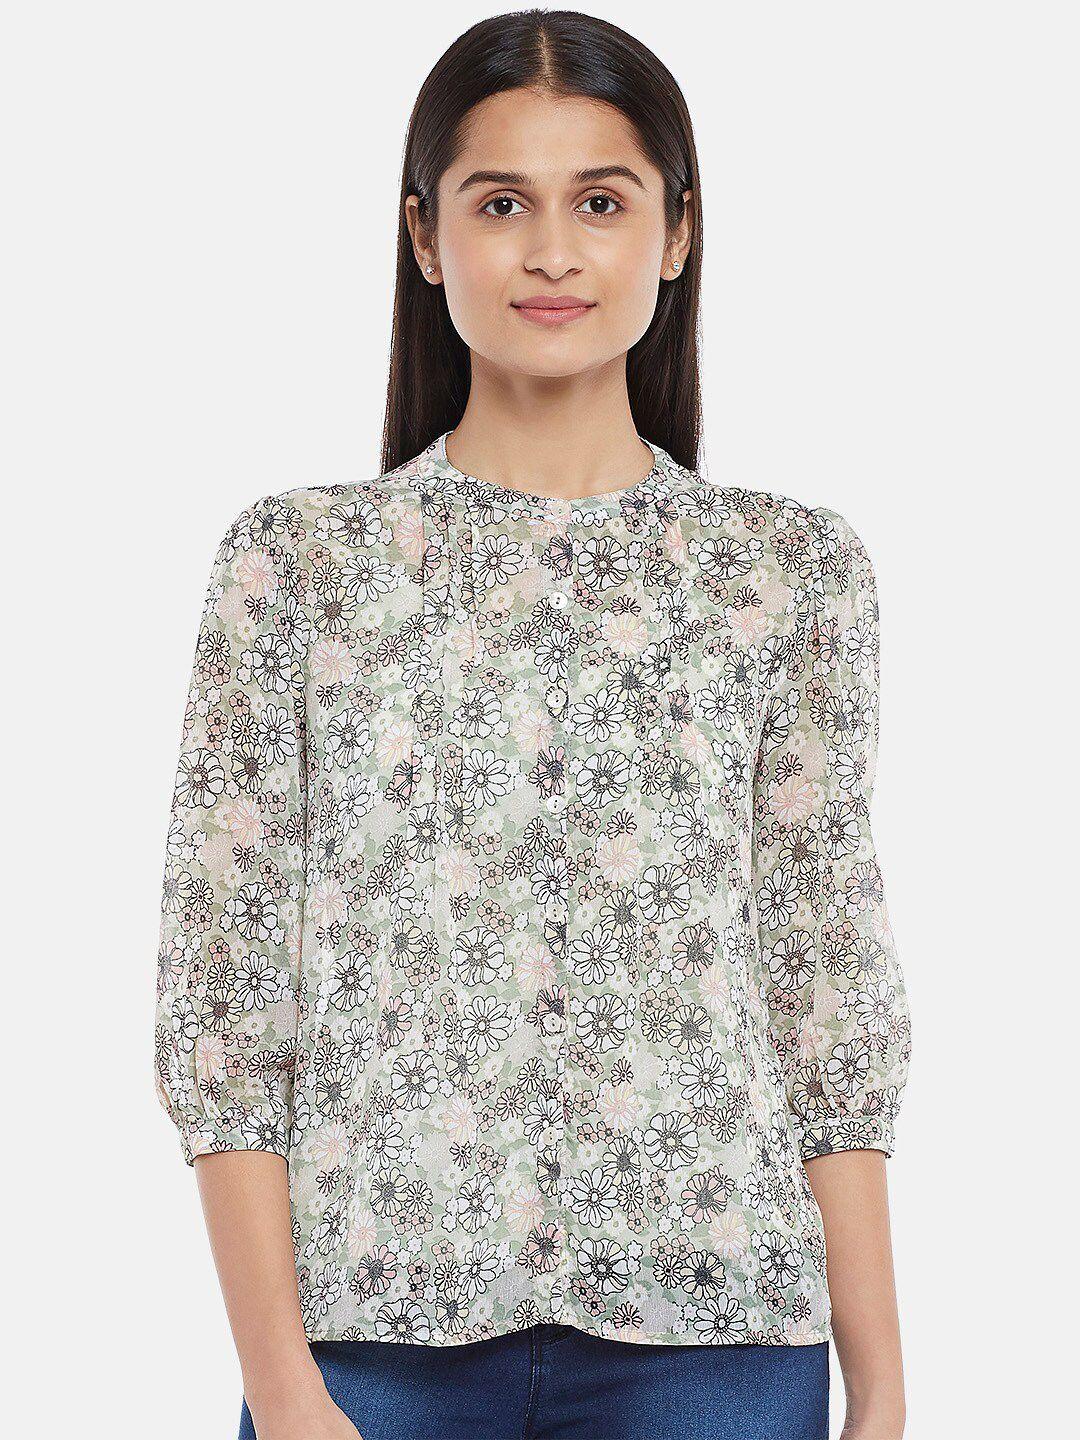 honey by pantaloons olive green floral print top